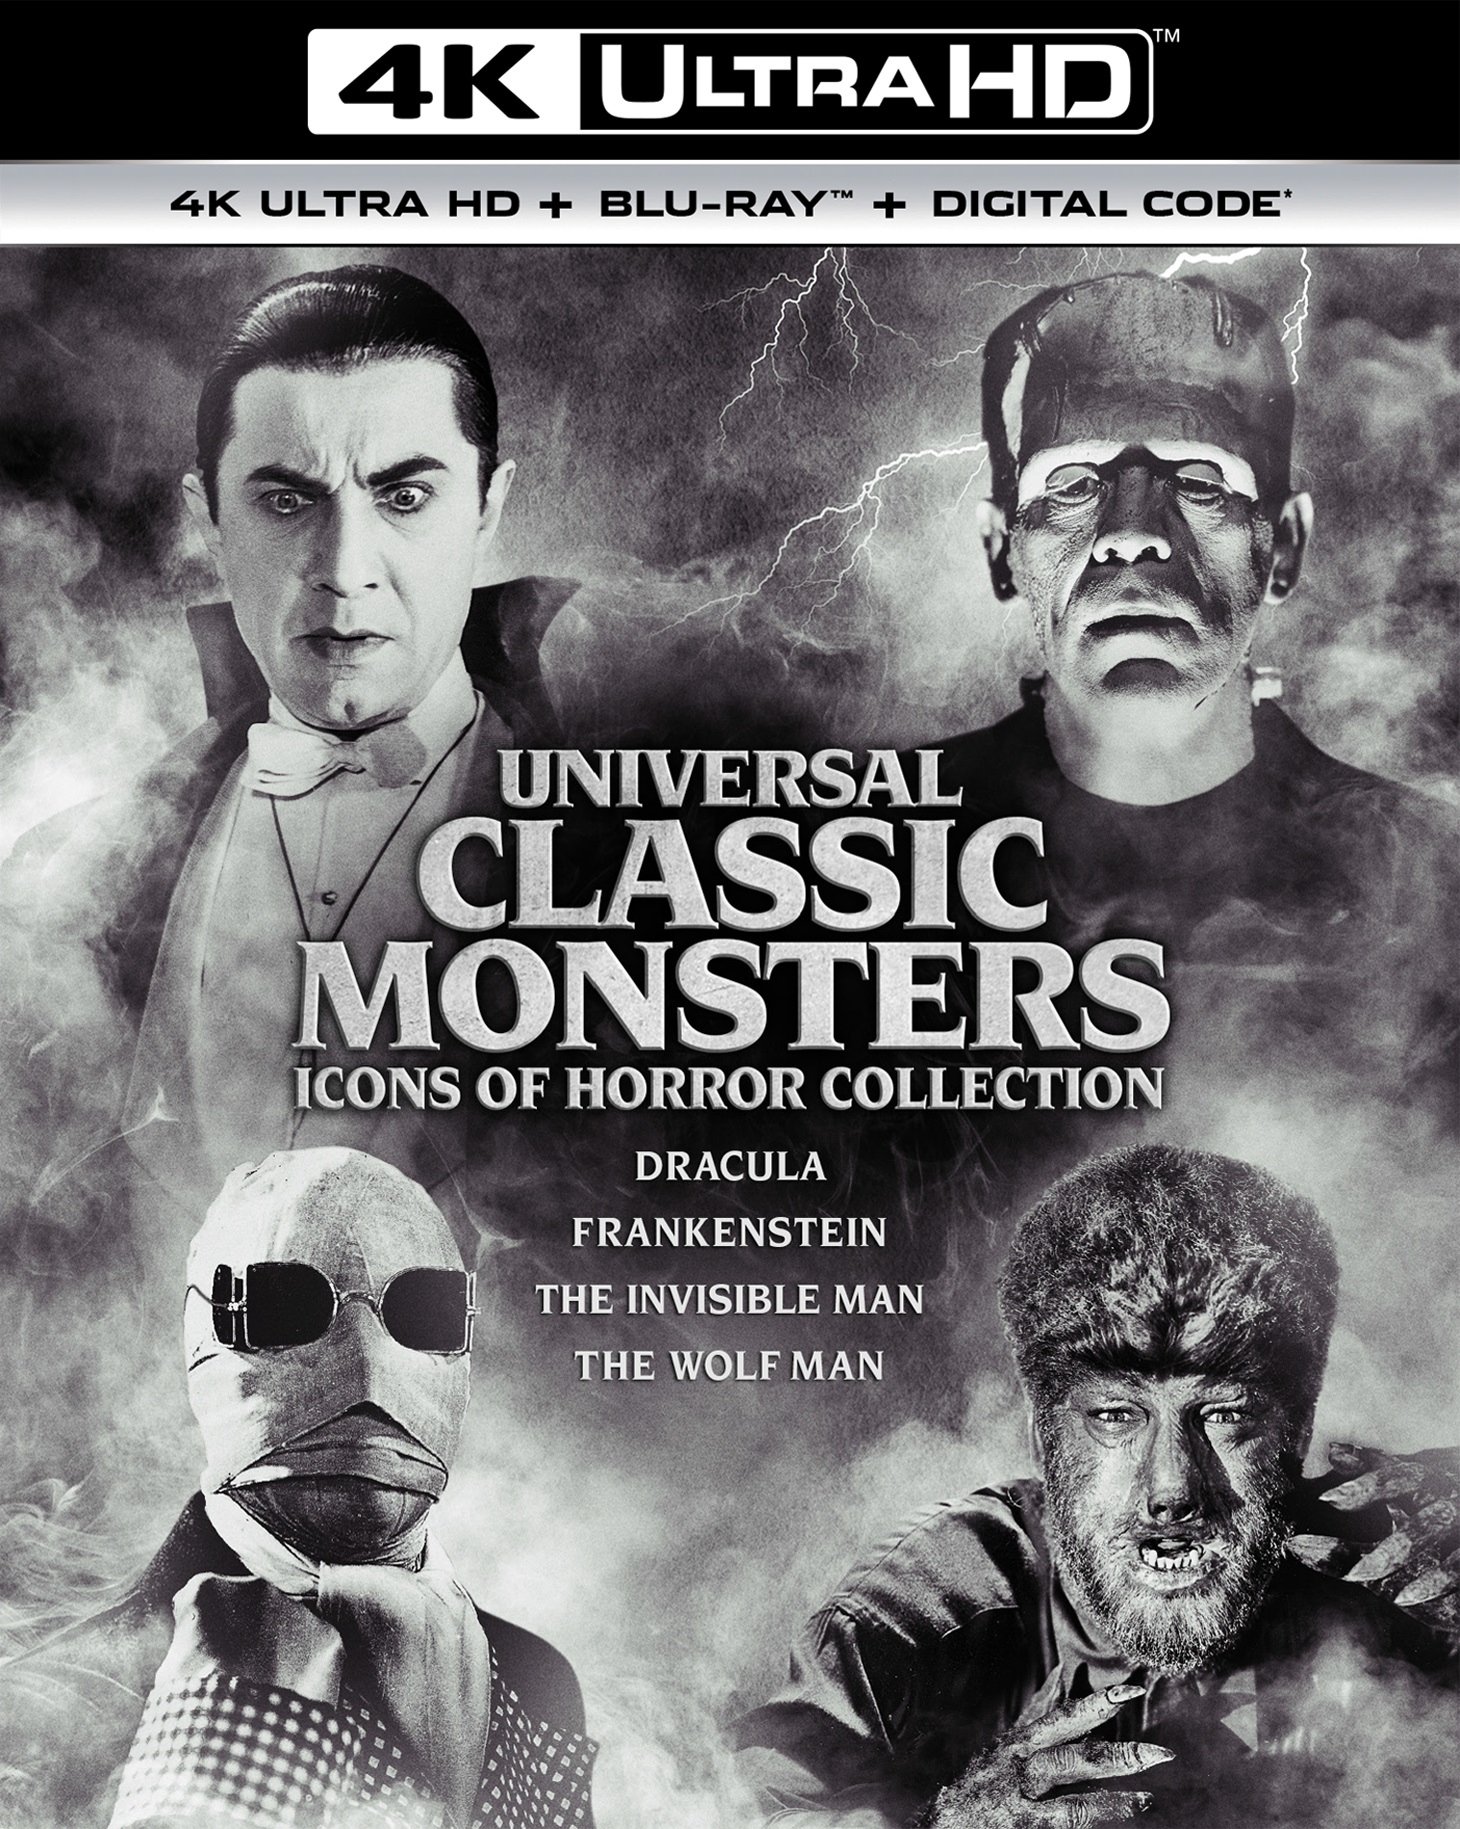 Universal Classic Monsters: Icons Of Horror Collection (4K Ultra HD + Blu-ray + Digital Copy) - UHD [ 1941 ]  - Horror Movies On 4K Ultra HD Blu-ray -